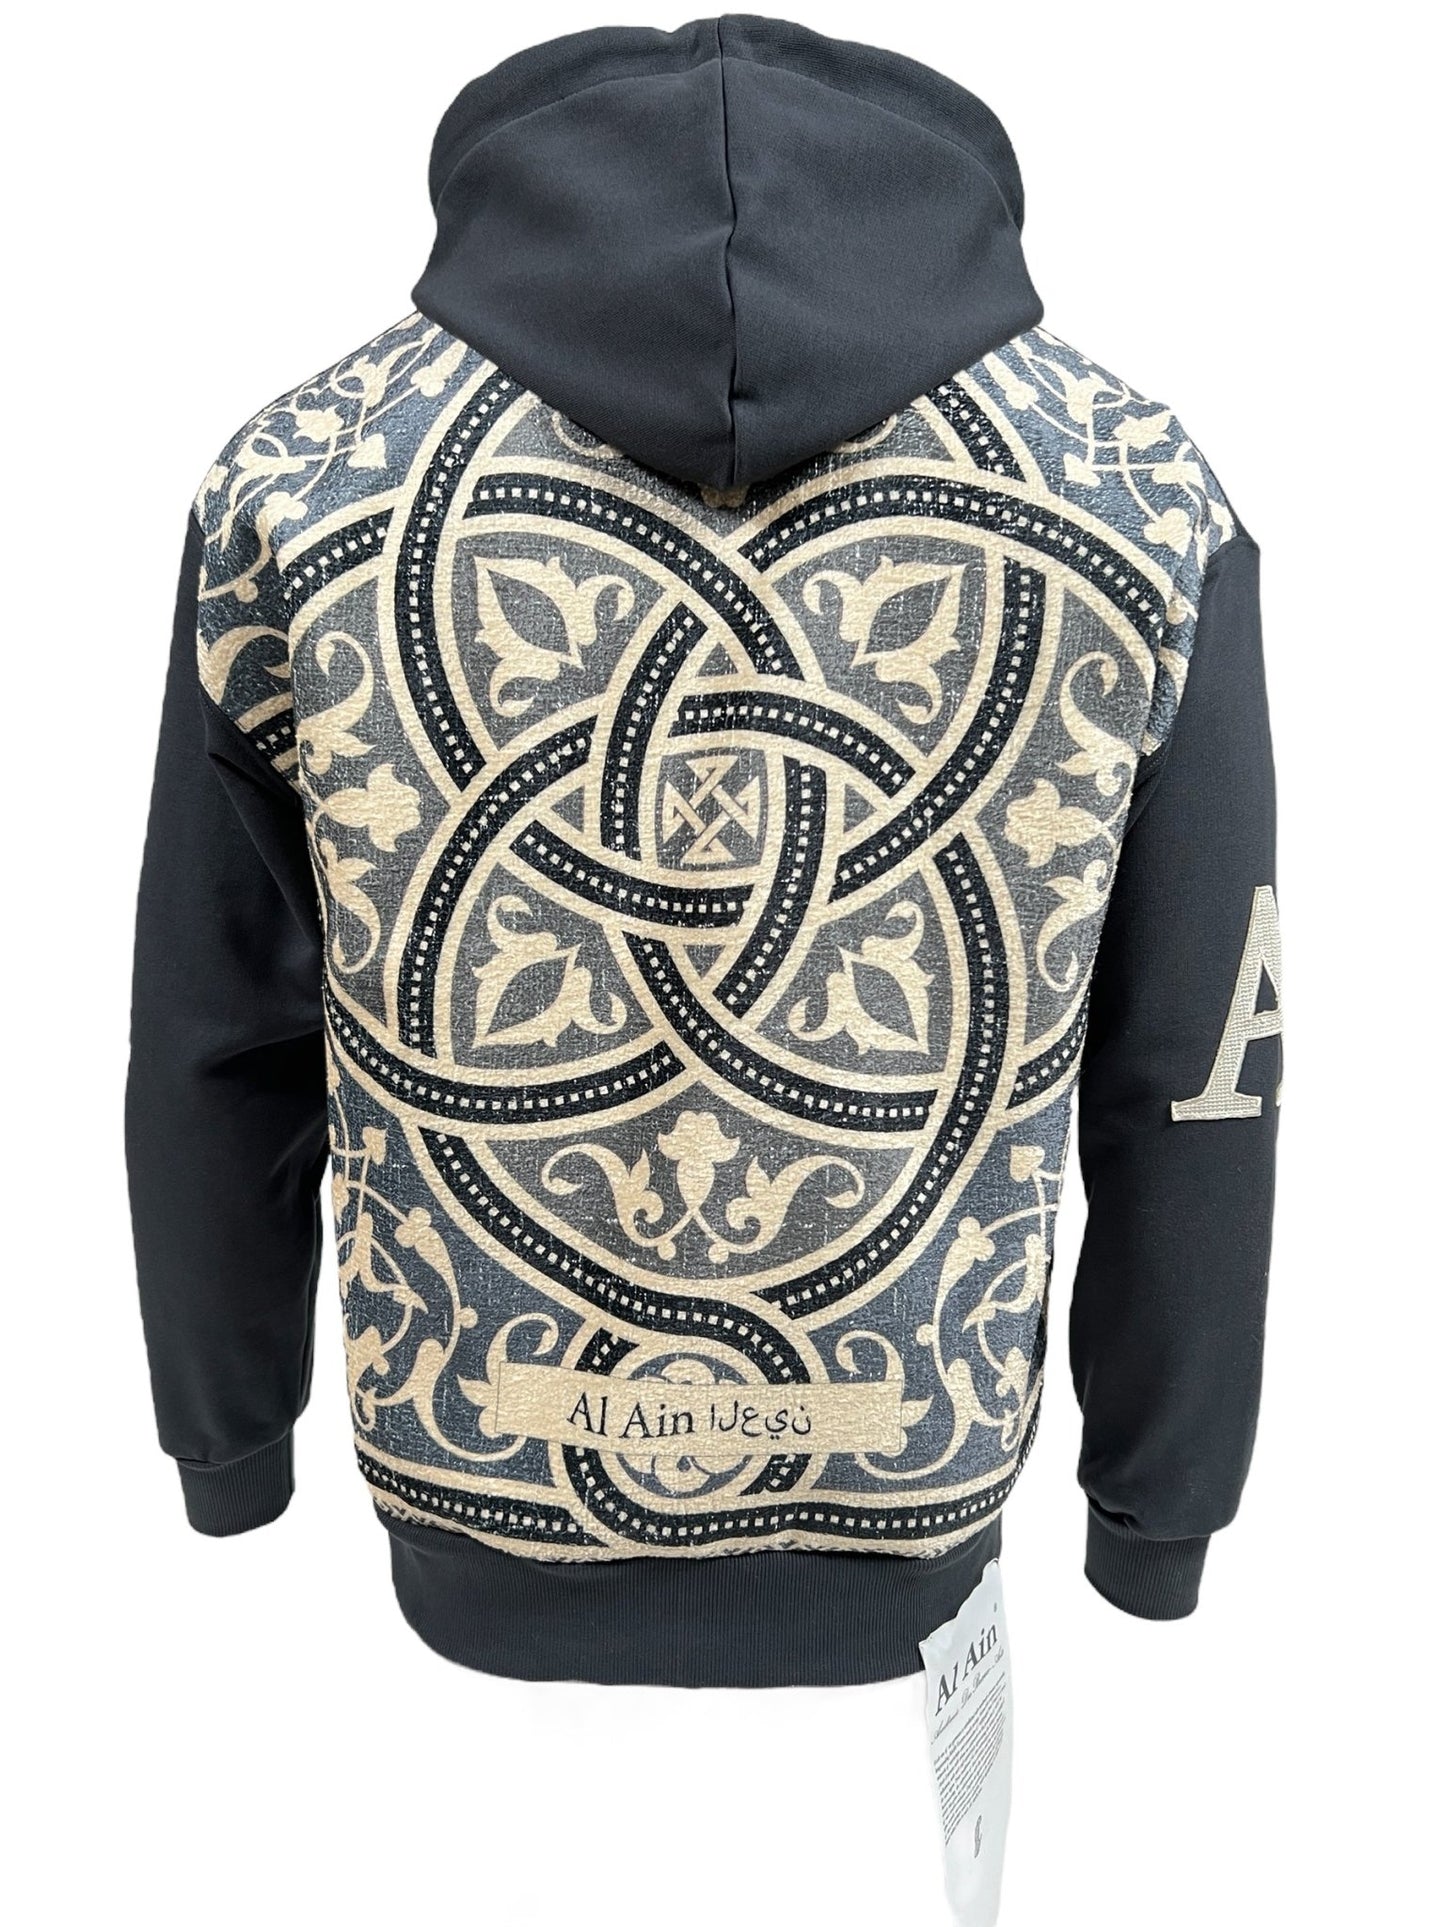 A black hooded streetwear sweatshirt with an intricate beige and grey geometric and floral pattern on the back, and "Al Ain 1968" written in Arabic and English at the bottom. This AL AIN AHZX S103 SECRET NOIR hoodie is crafted from 100% cotton for ultimate comfort.